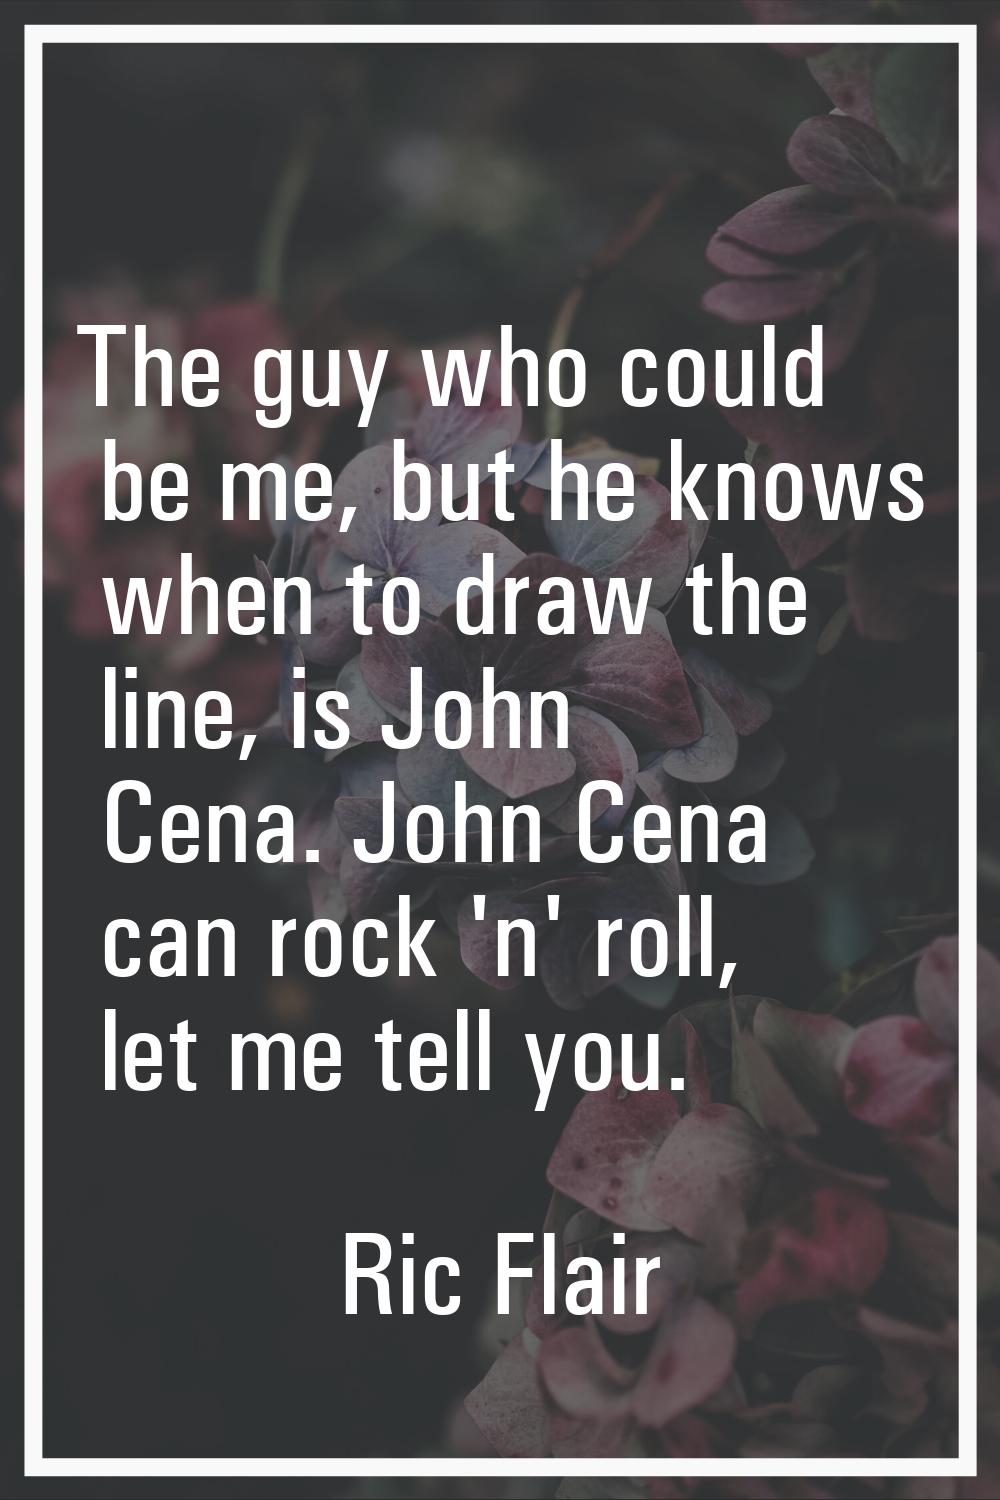 The guy who could be me, but he knows when to draw the line, is John Cena. John Cena can rock 'n' r